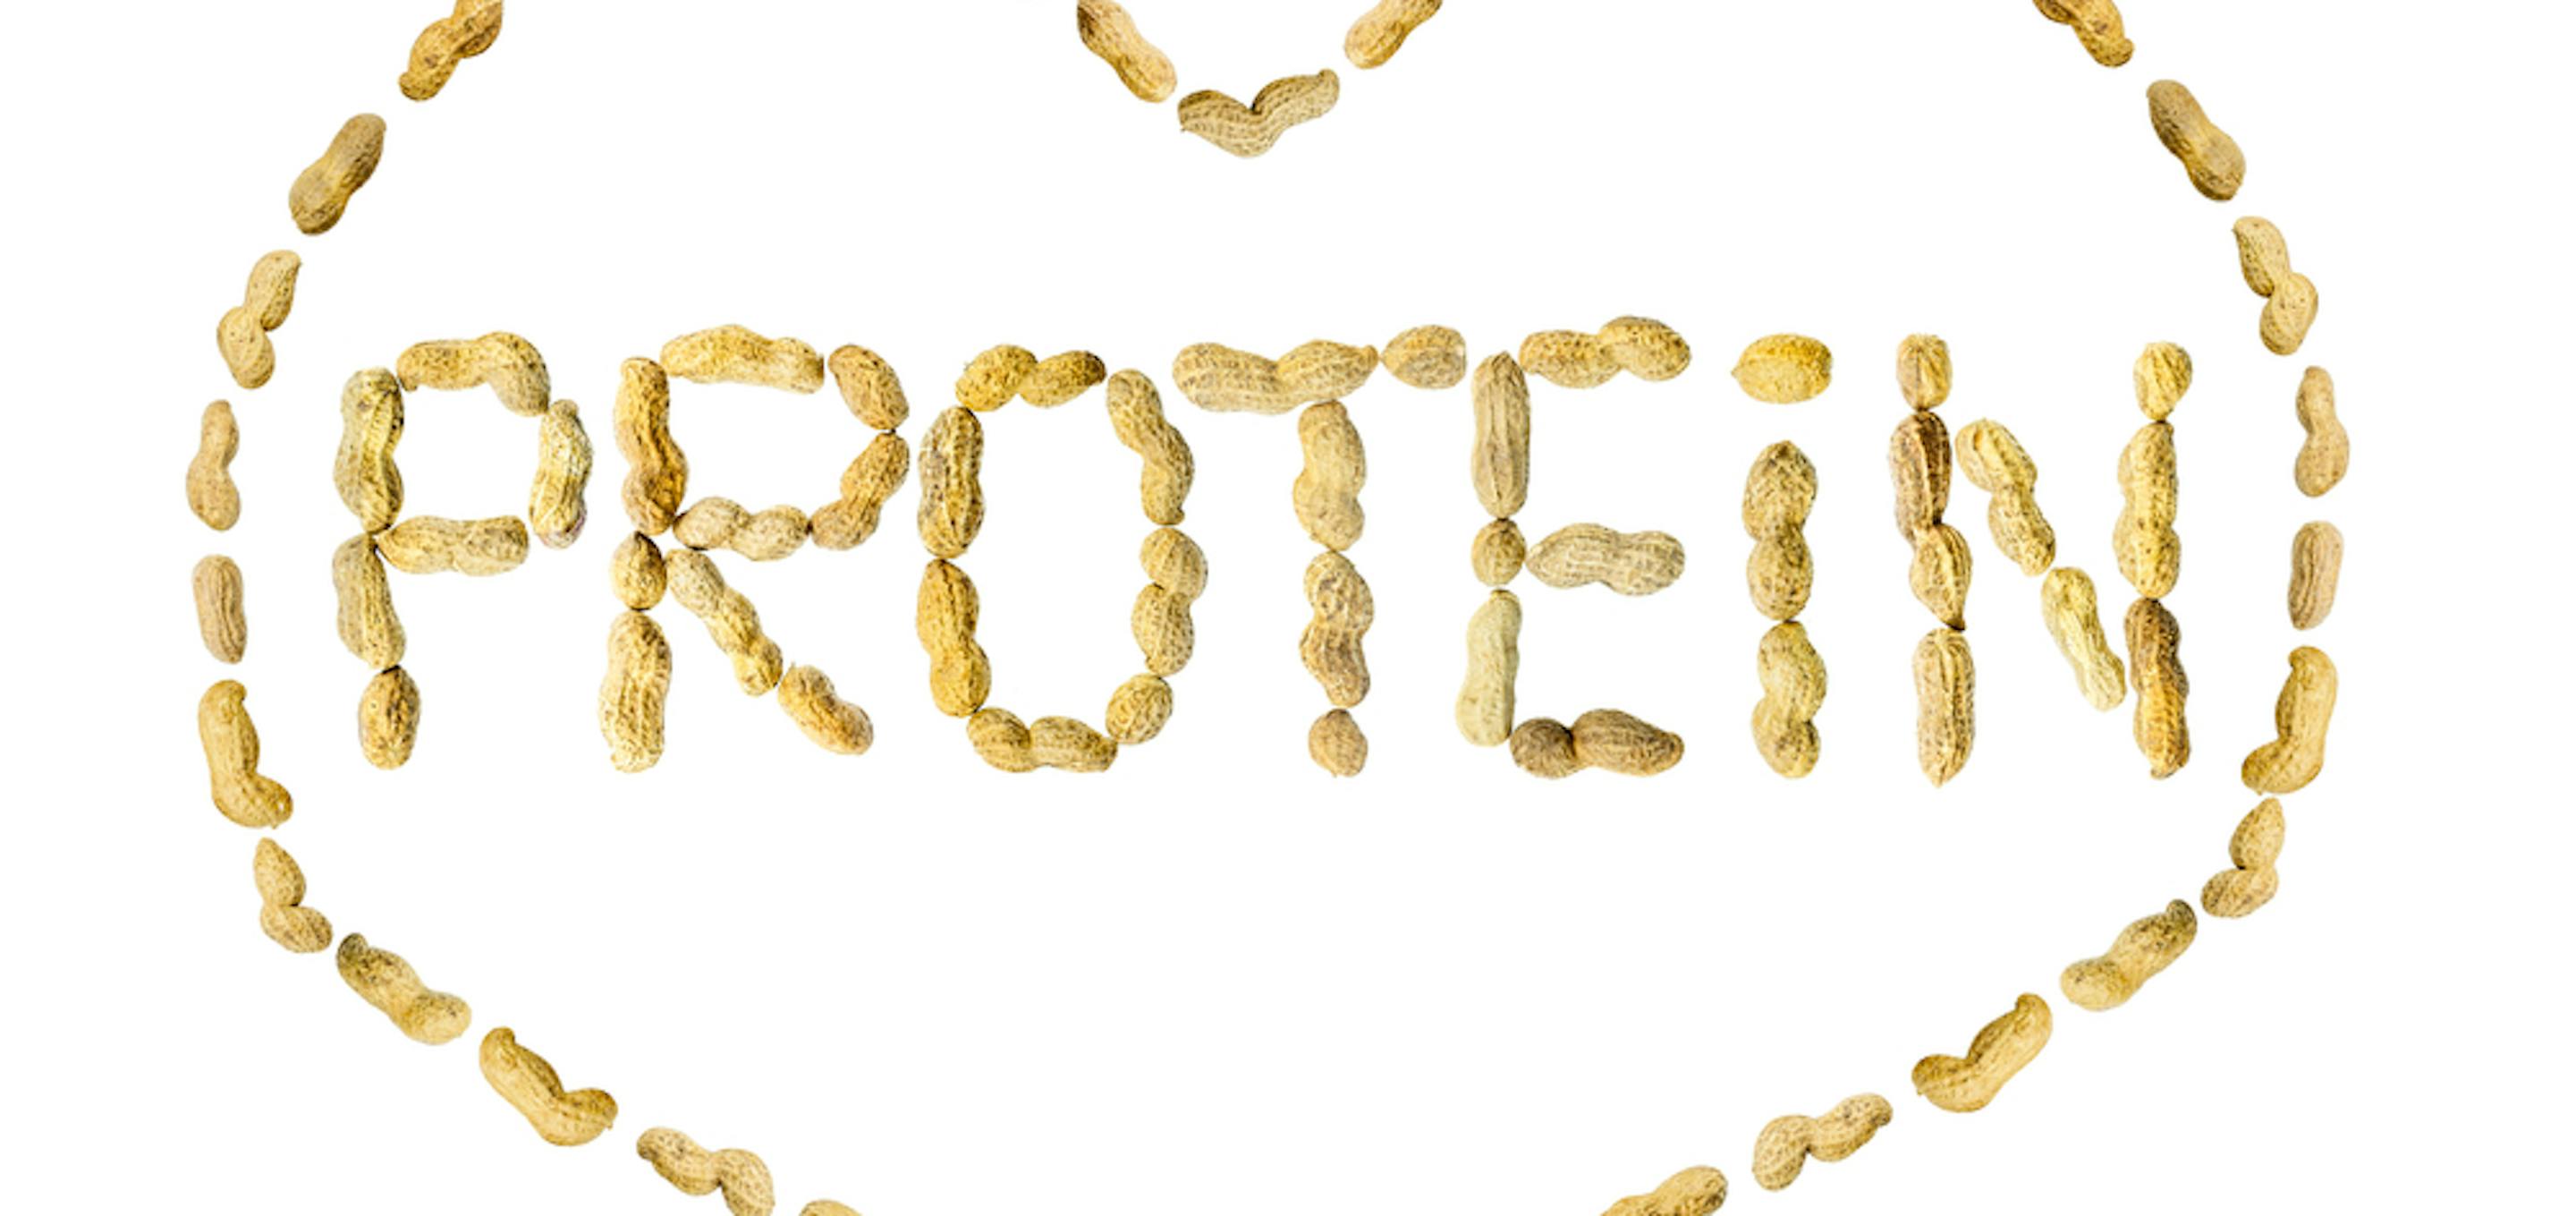 The word Protein created by an arrangement of peanuts